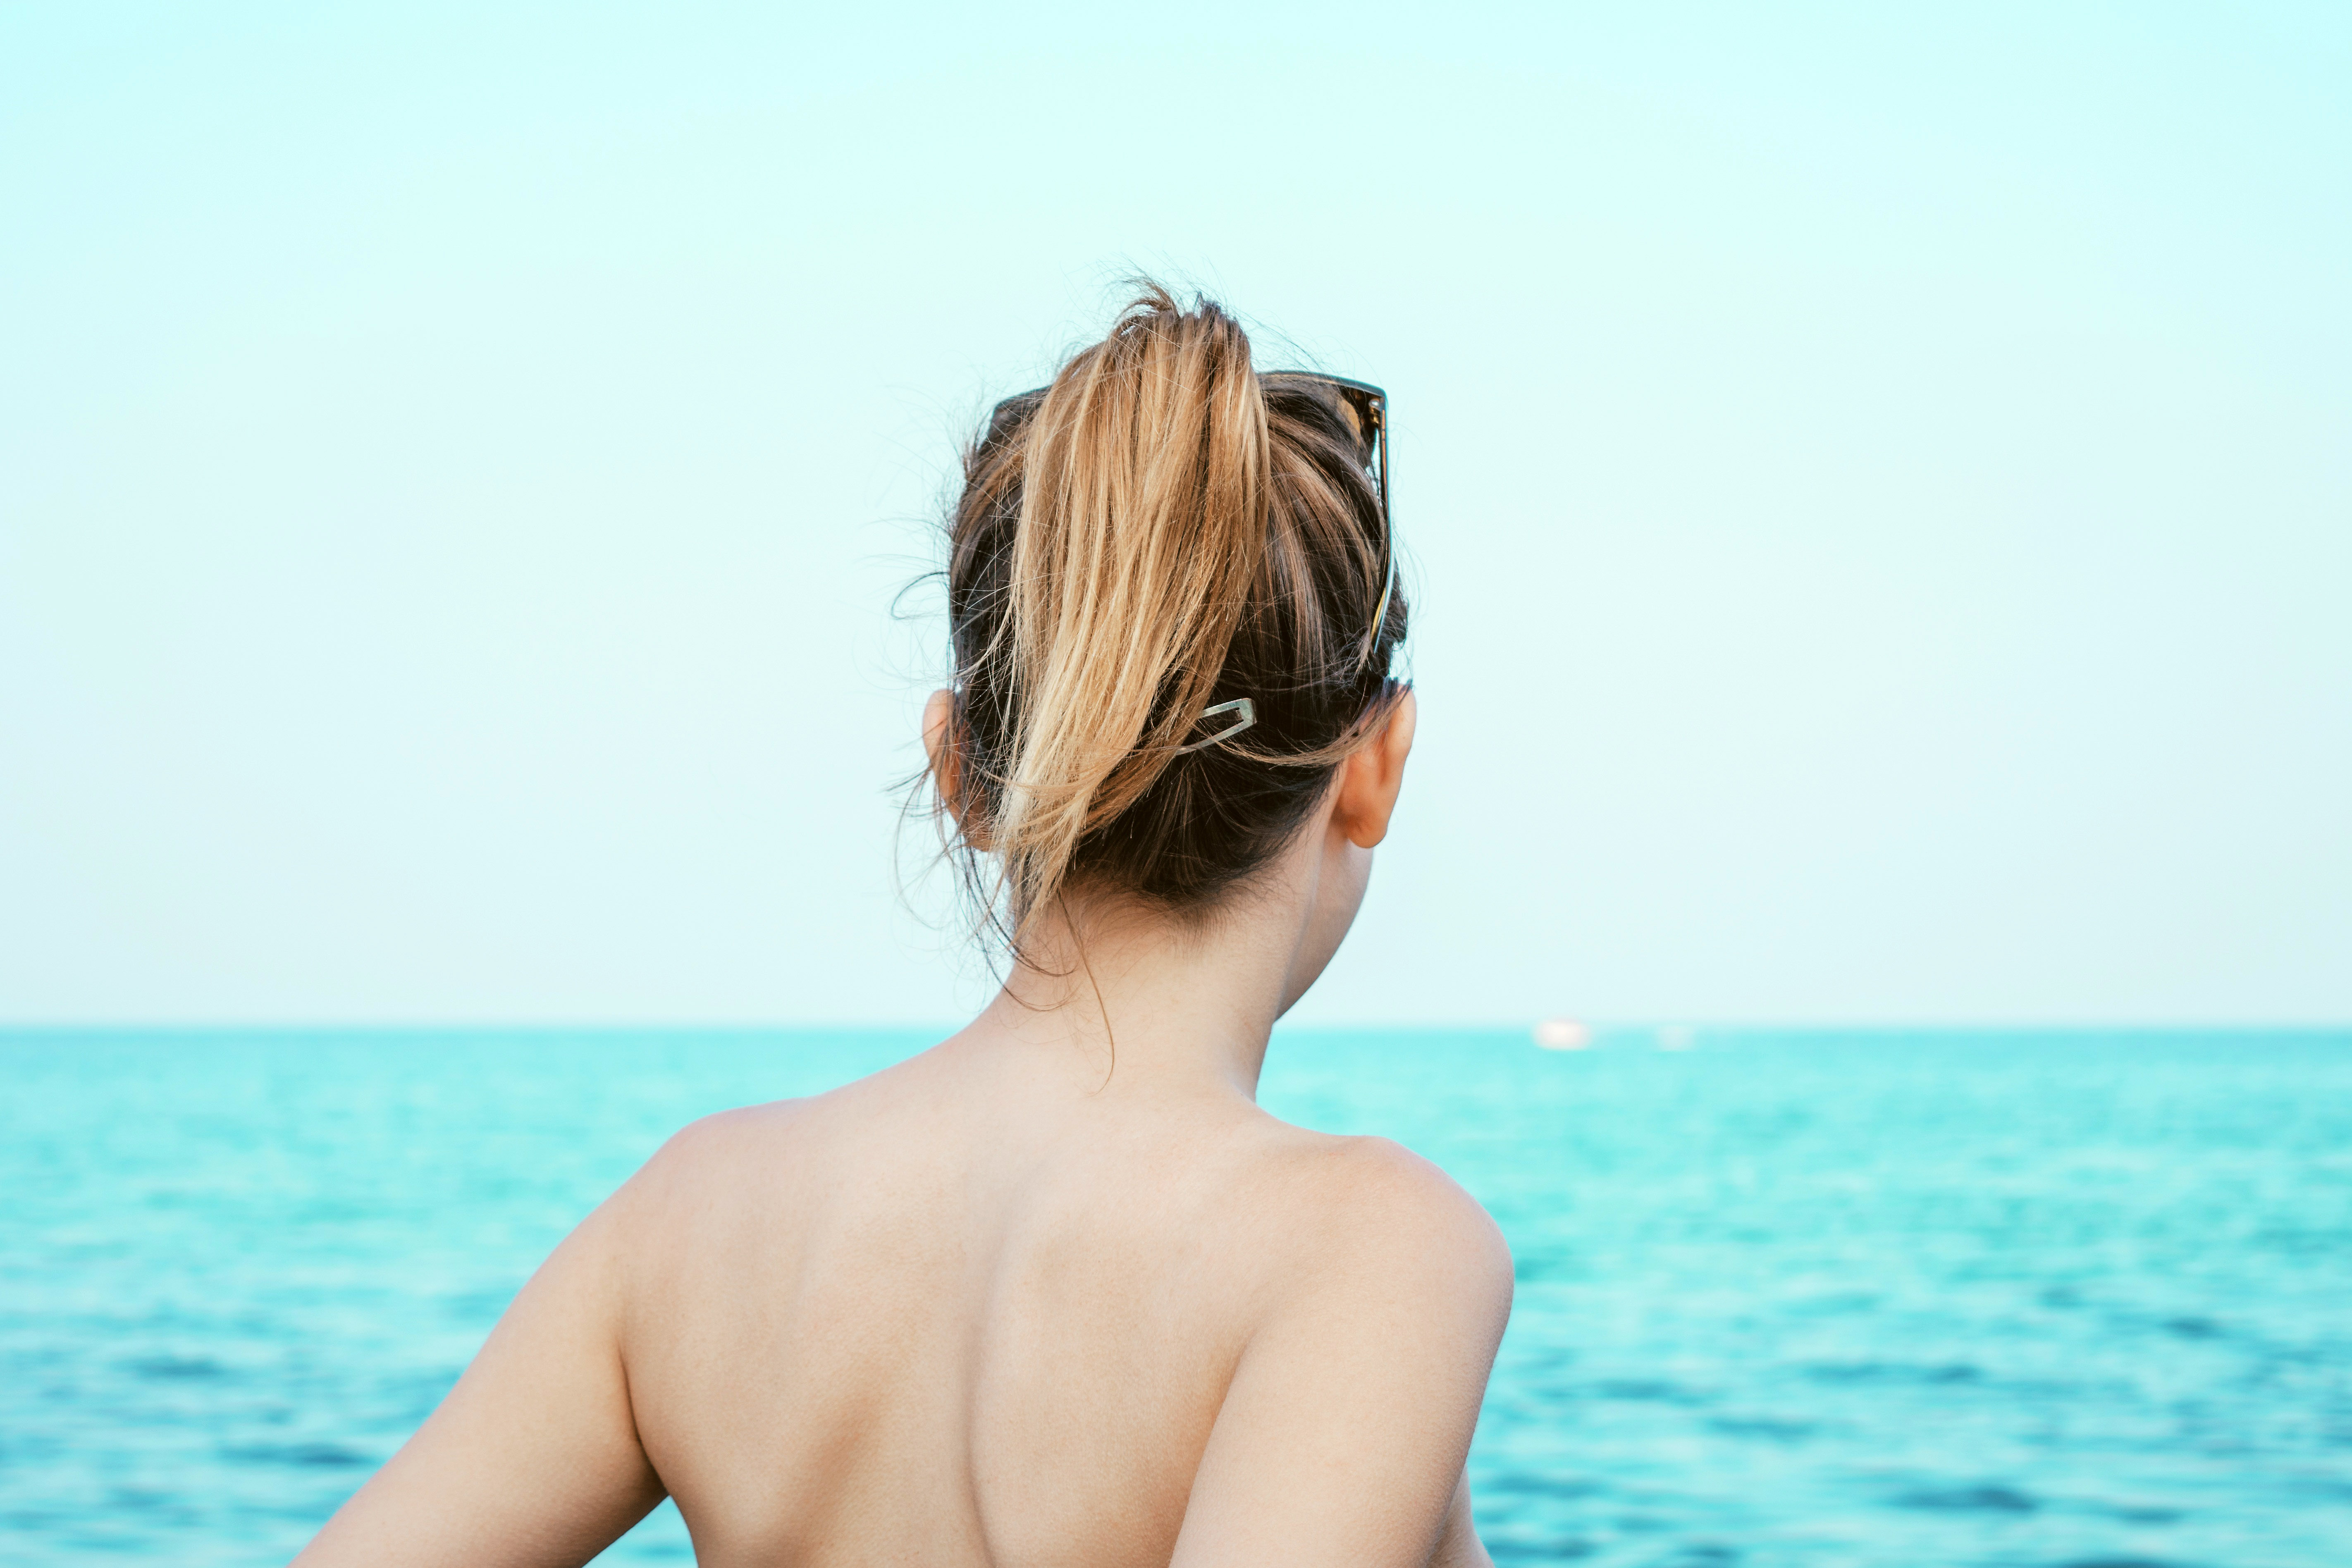 Back of a girl at the beach image - Free stock photo - Public Domain ...